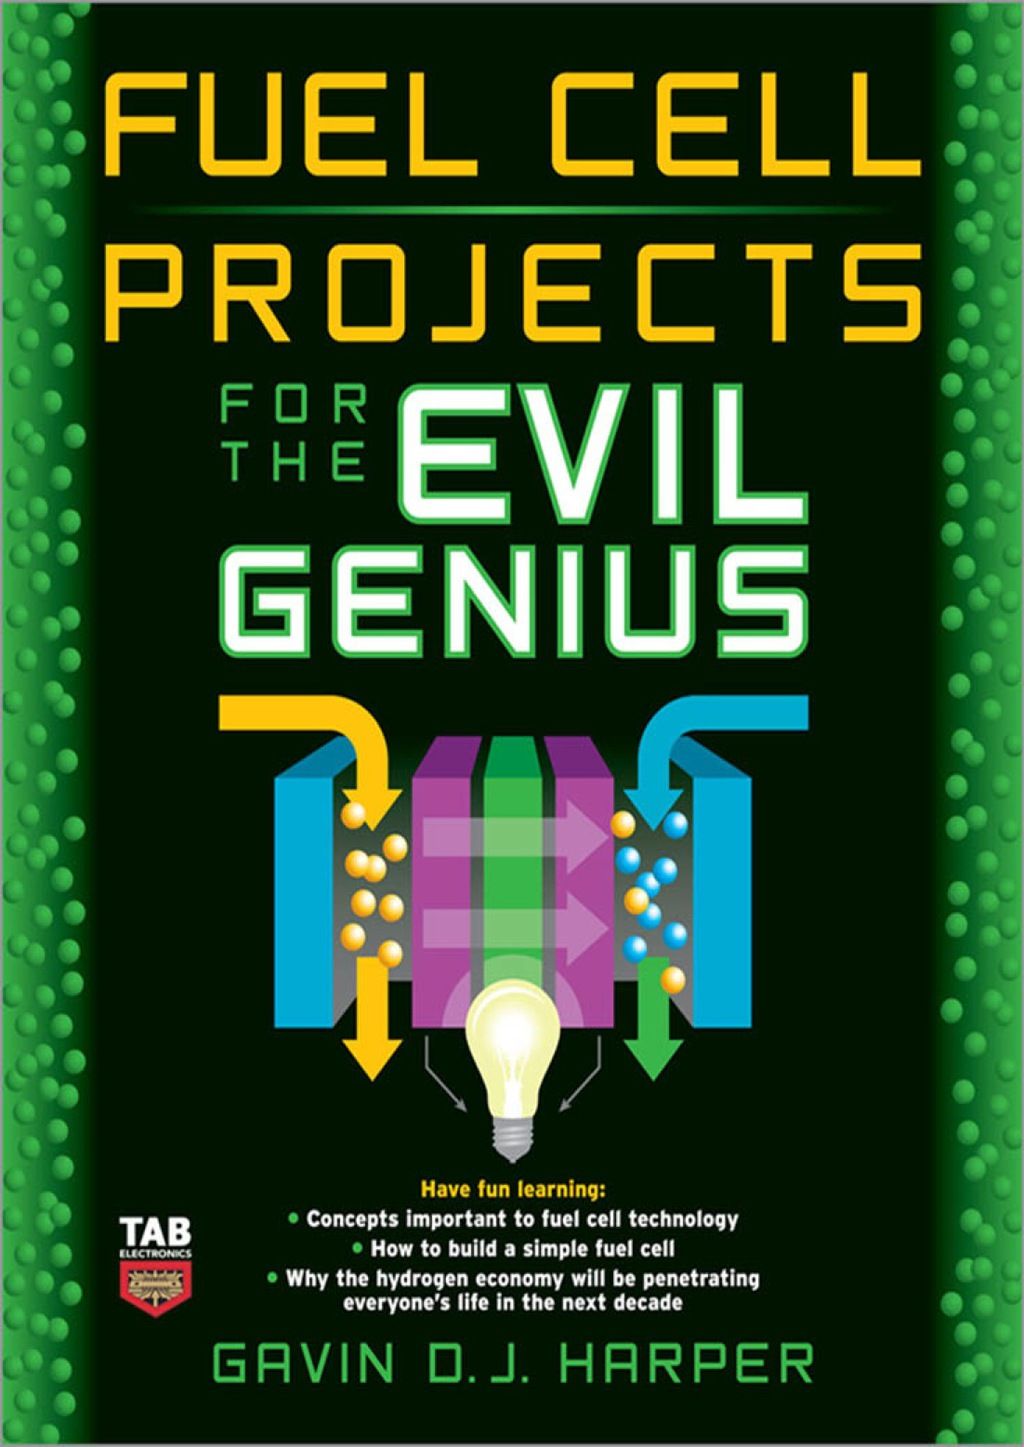 FUEL CELL PROJECTS FOR THE EVIL GENIUS BY GAVIN D.J. HARPER